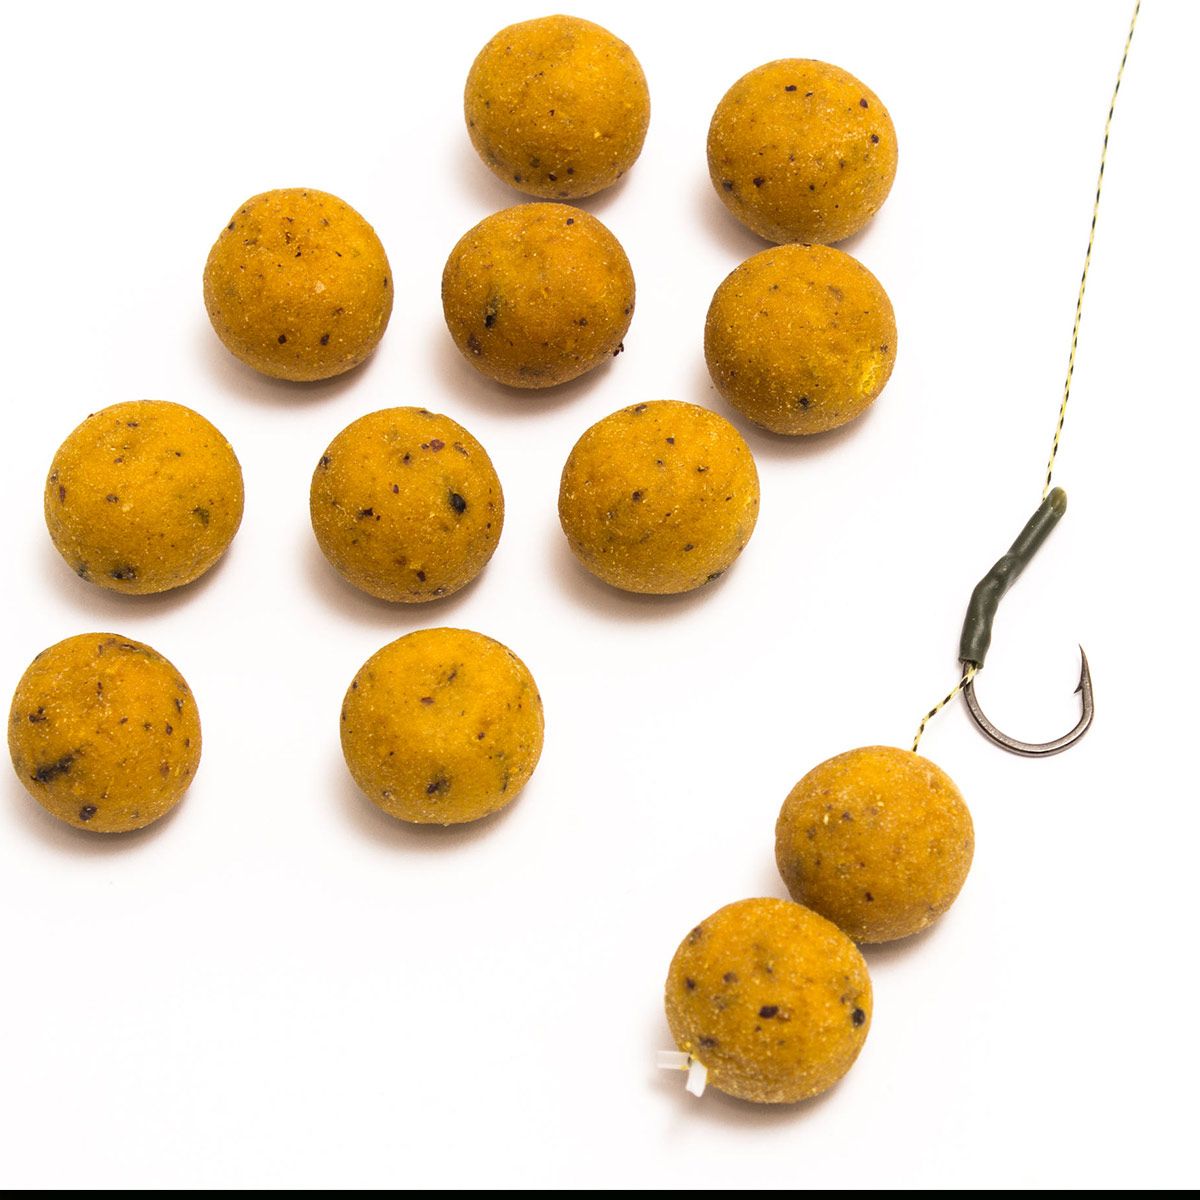 carp boilies, carp boilies Suppliers and Manufacturers at